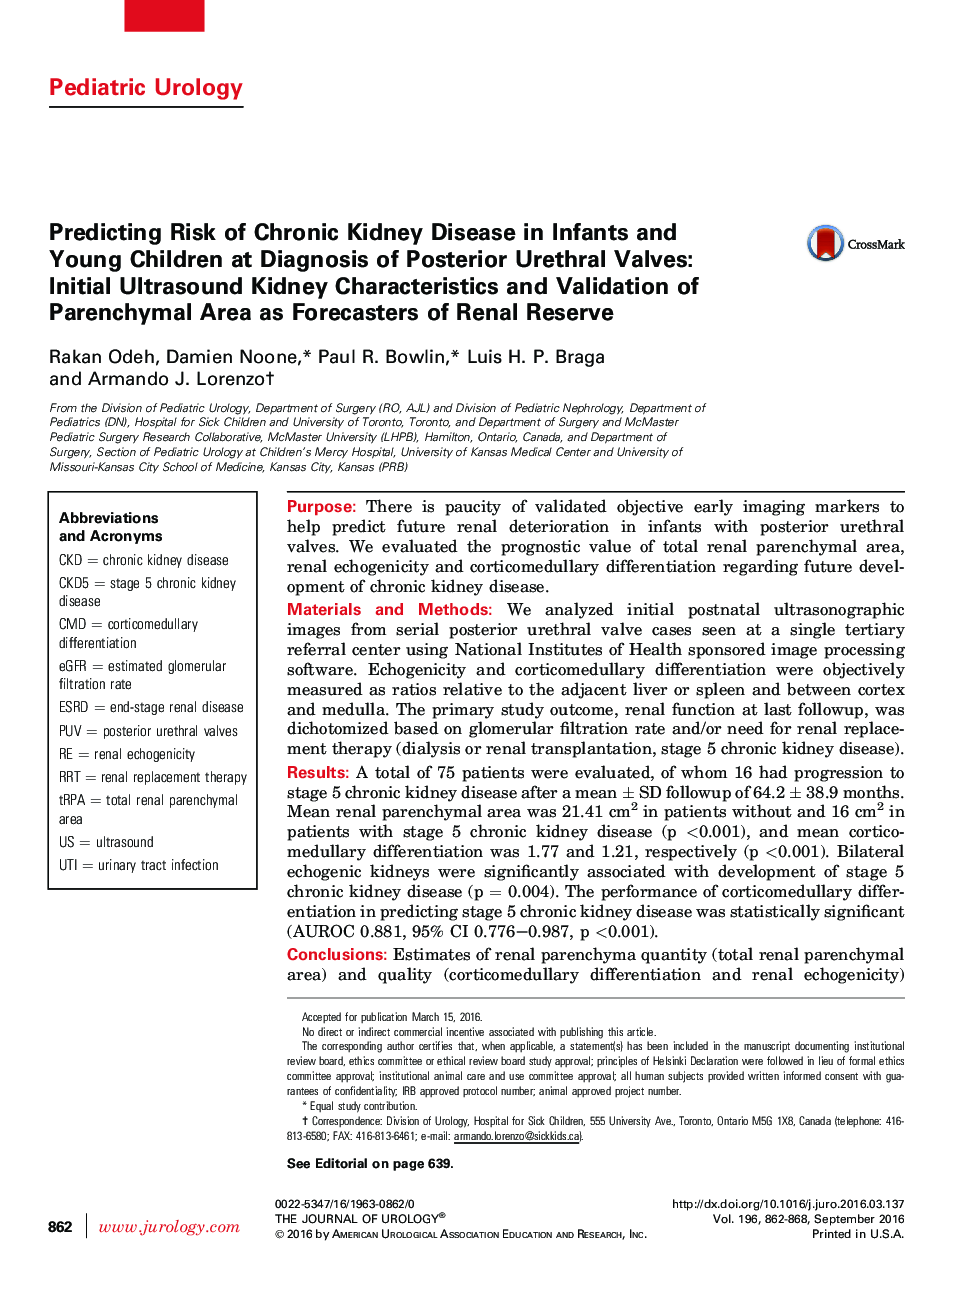 Predicting Risk of Chronic Kidney Disease in Infants and Young Children at Diagnosis of Posterior Urethral Valves: Initial Ultrasound Kidney Characteristics and Validation of Parenchymal Area as Forecasters of Renal Reserve 